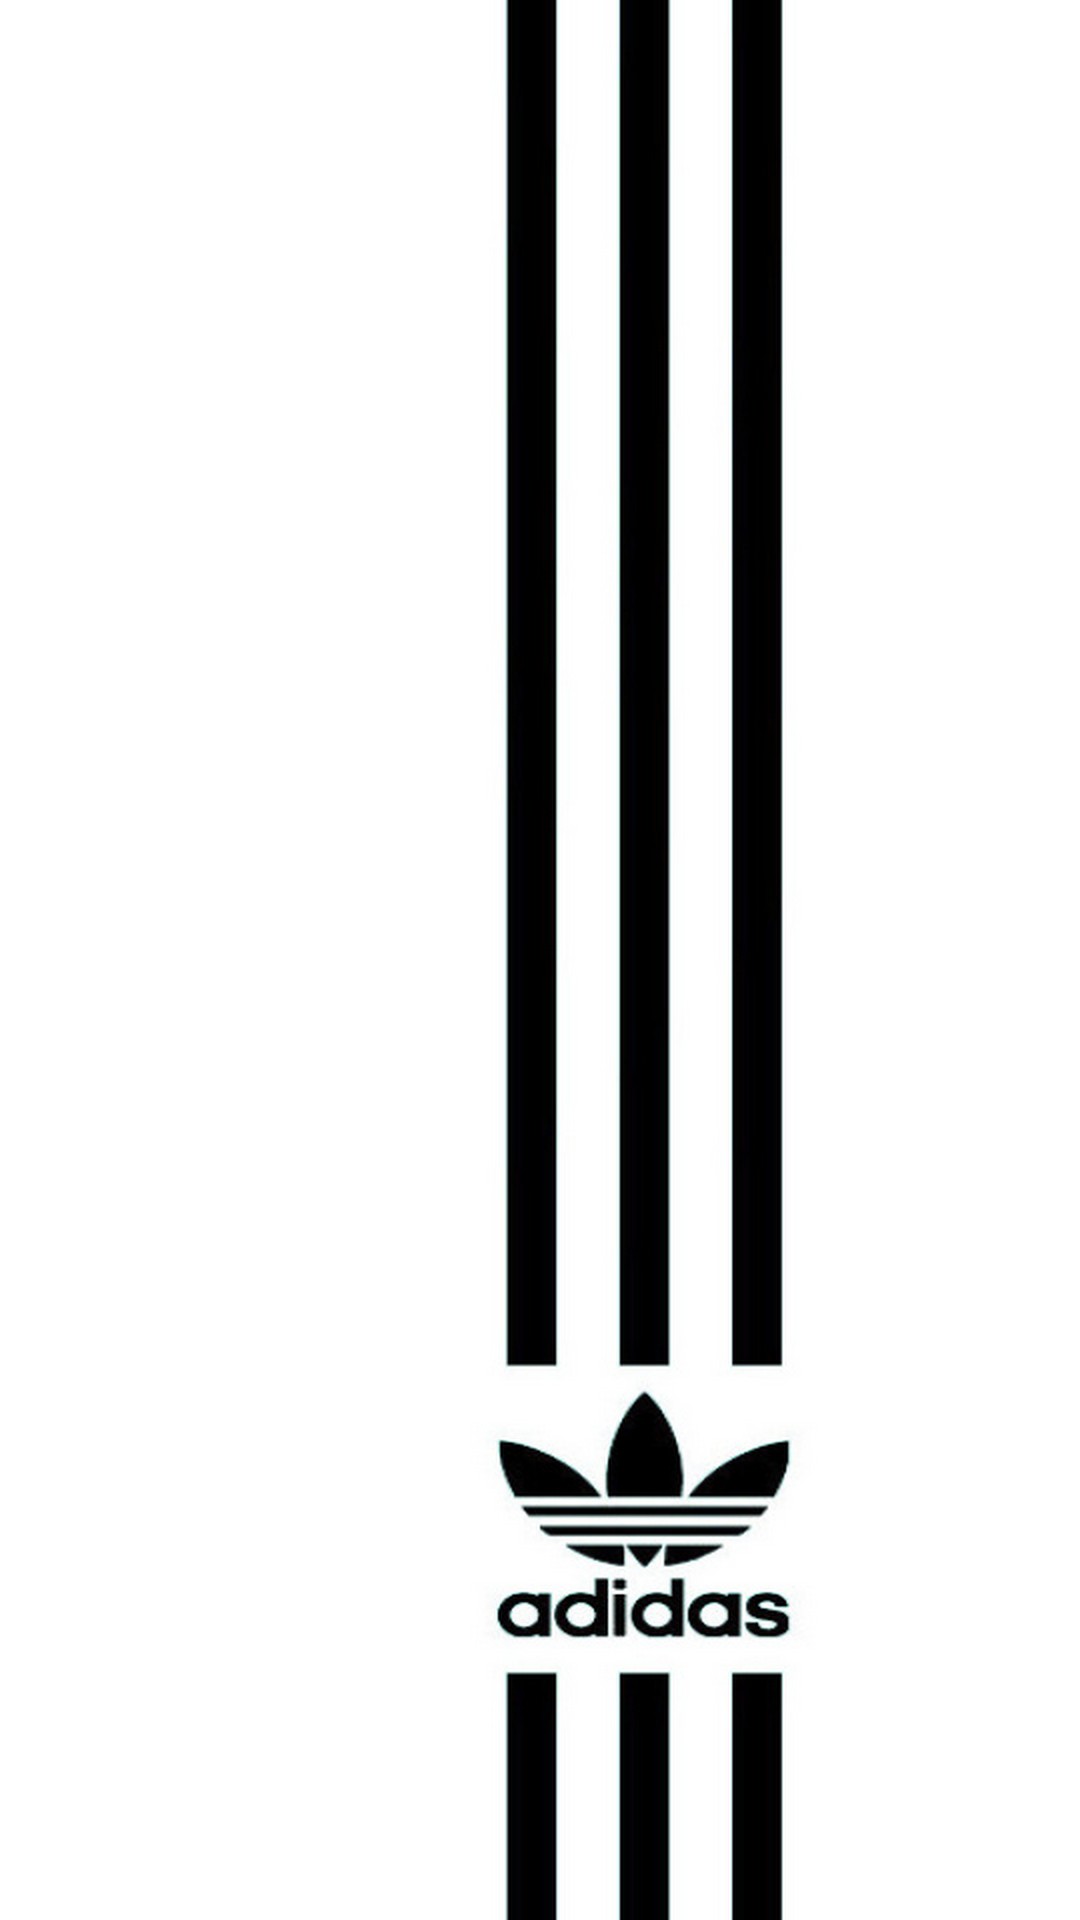 Logo Adidas iPhone Wallpaper Design With high-resolution 1080X1920 pixel. You can set as wallpaper for Apple iPhone X, XS Max, XR, 8, 7, 6, SE, iPad. Enjoy and share your favorite HD wallpapers and background images